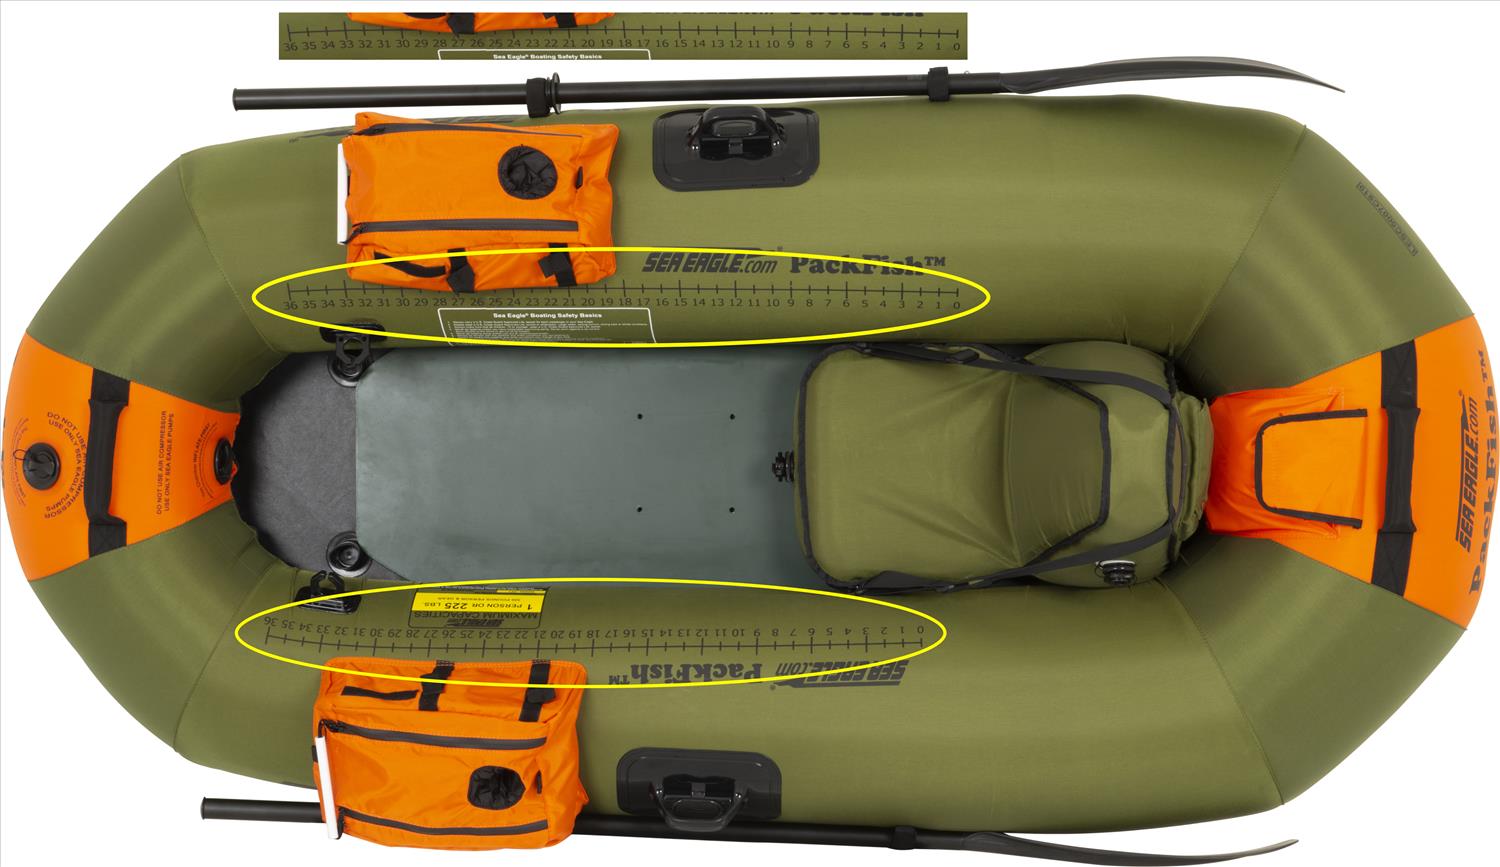 Sea Eagle PackFish7™ 1 person Inflatable Fishing Boat. Package